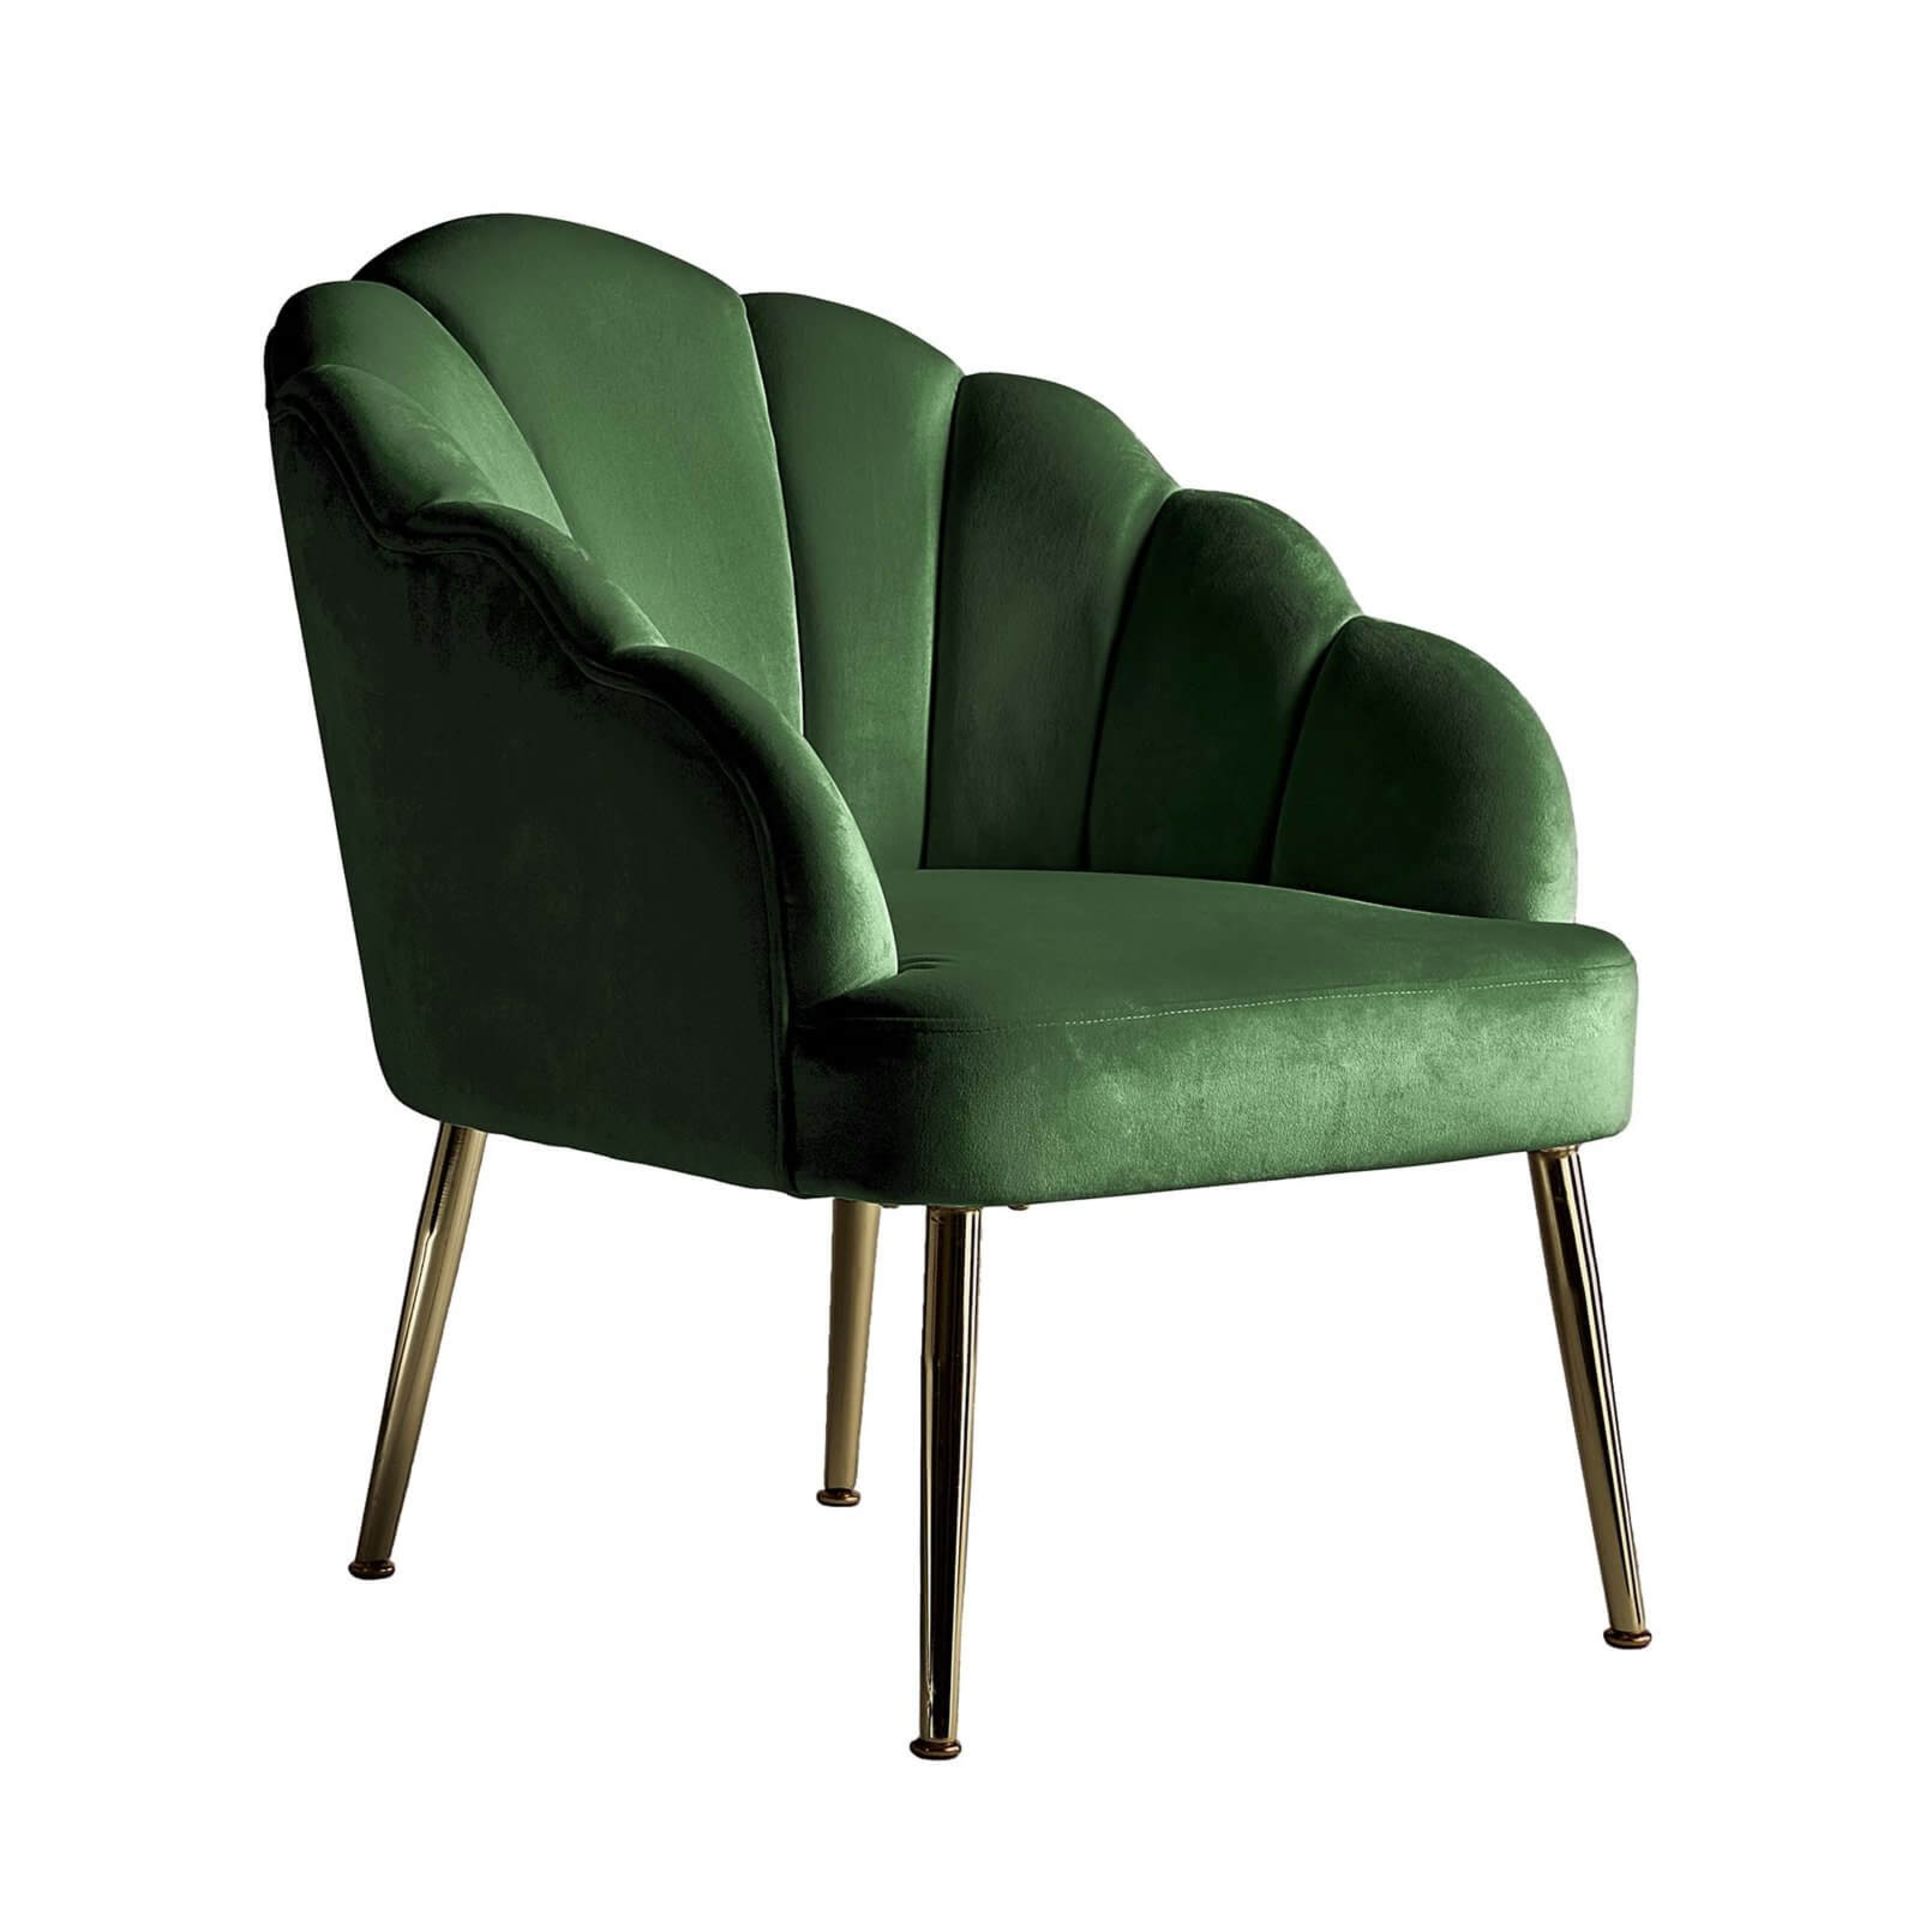 (R6J) 1 X Occasional Chair Emerald. Velvet Cover With Rubberwood Legs (H72xW60xD70cm) - Image 3 of 4